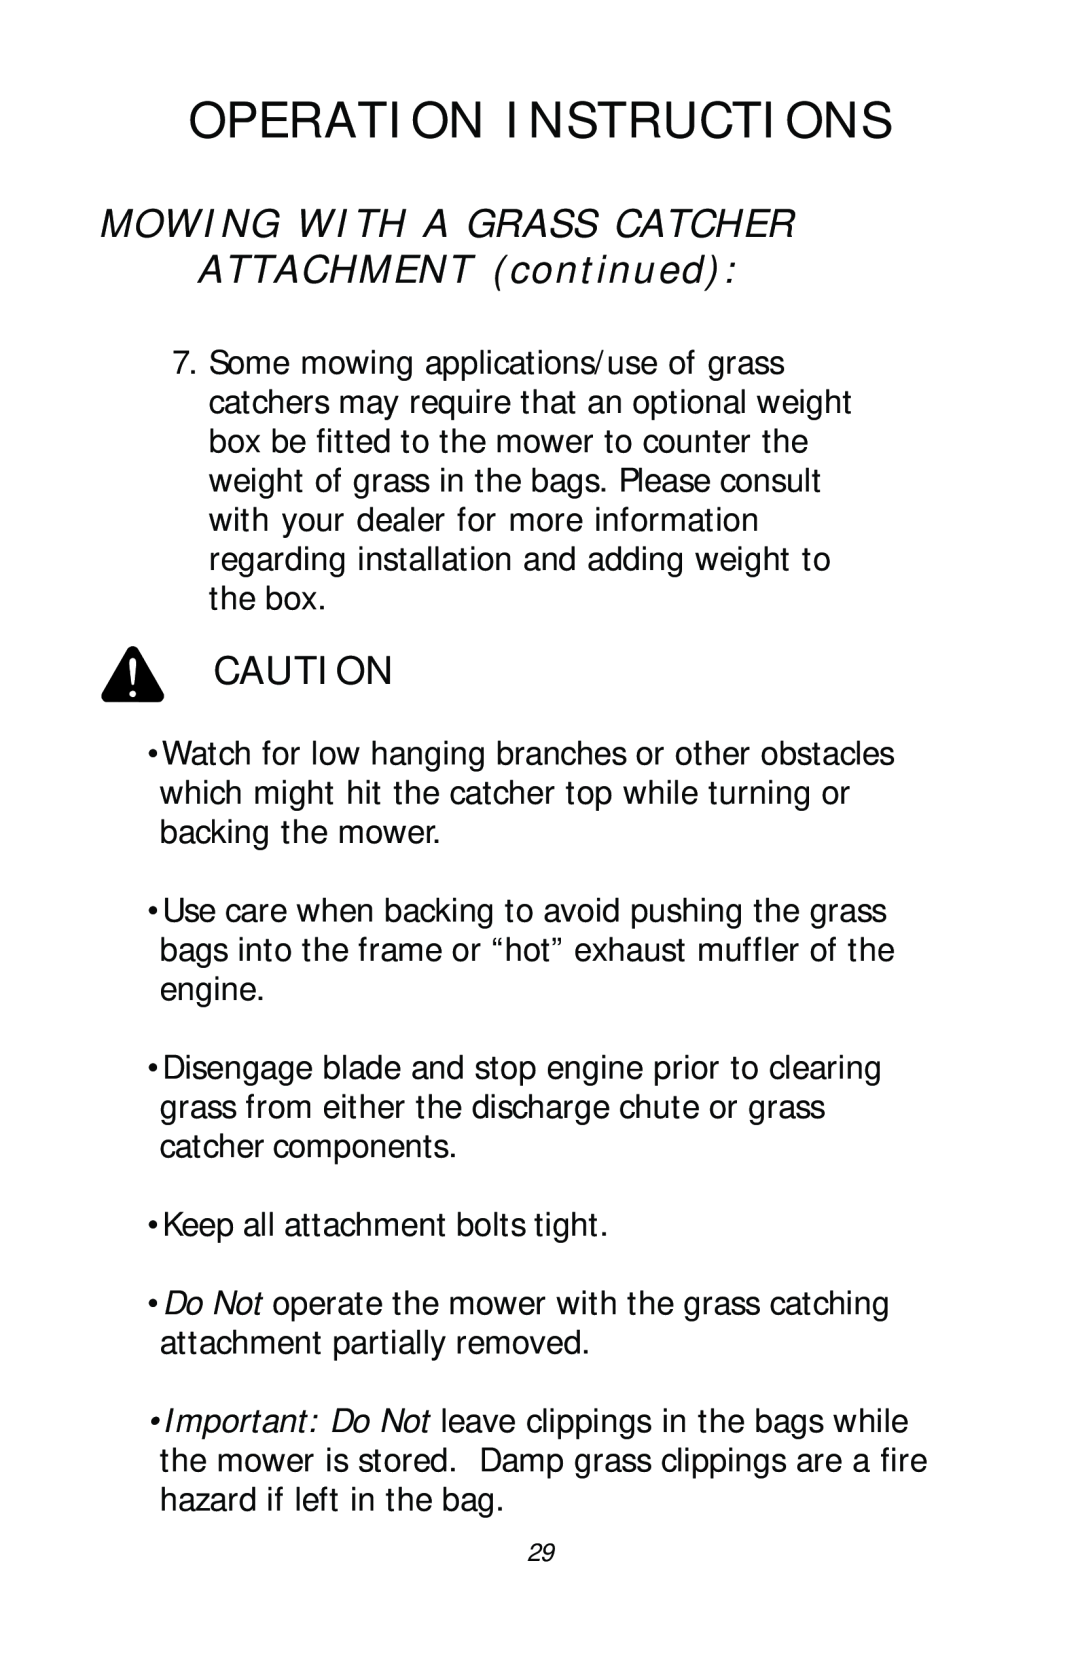 Dixon ZTR 4515, ZTR 4516, ZTR 4518, 13782-0503 manual MOWING WITH A GRASS CATCHER ATTACHMENT continued, Operation Instructions 